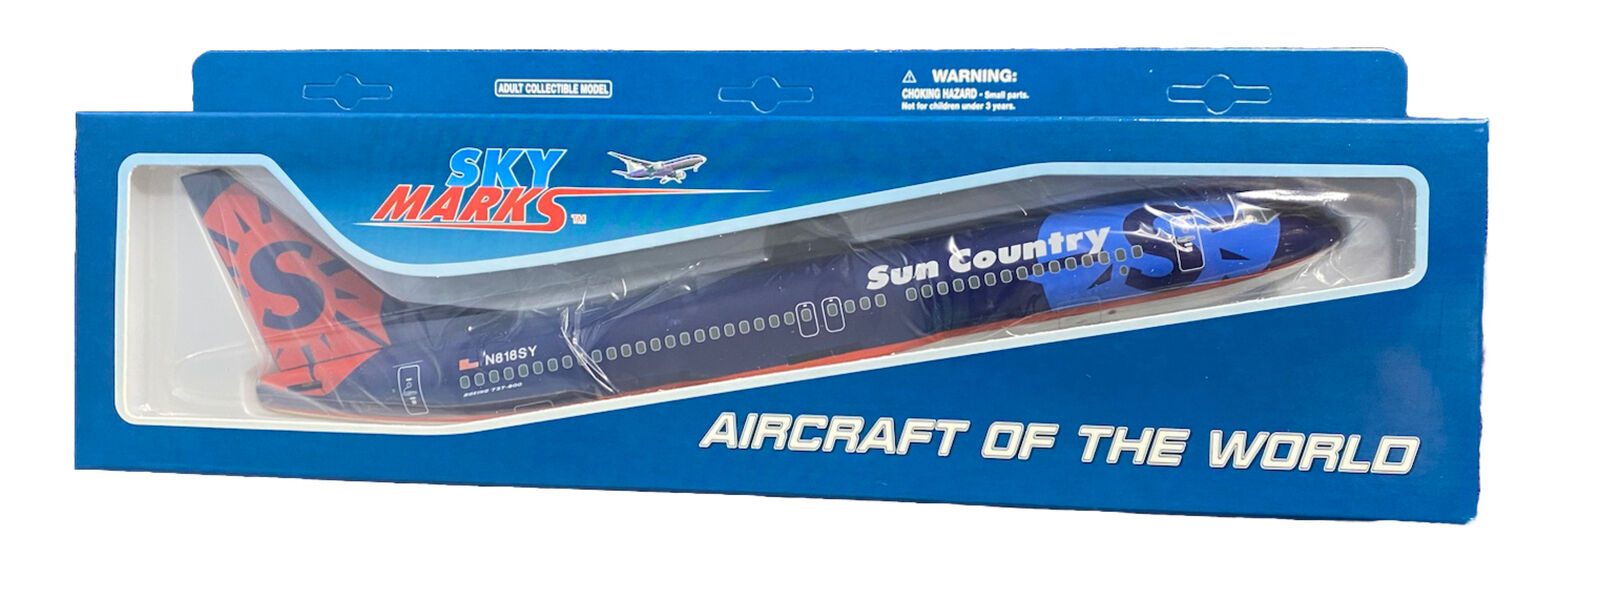 Sky Marks Daron Sun Country Airlines 1/130 Vintage Livery Model Airplane 737-800